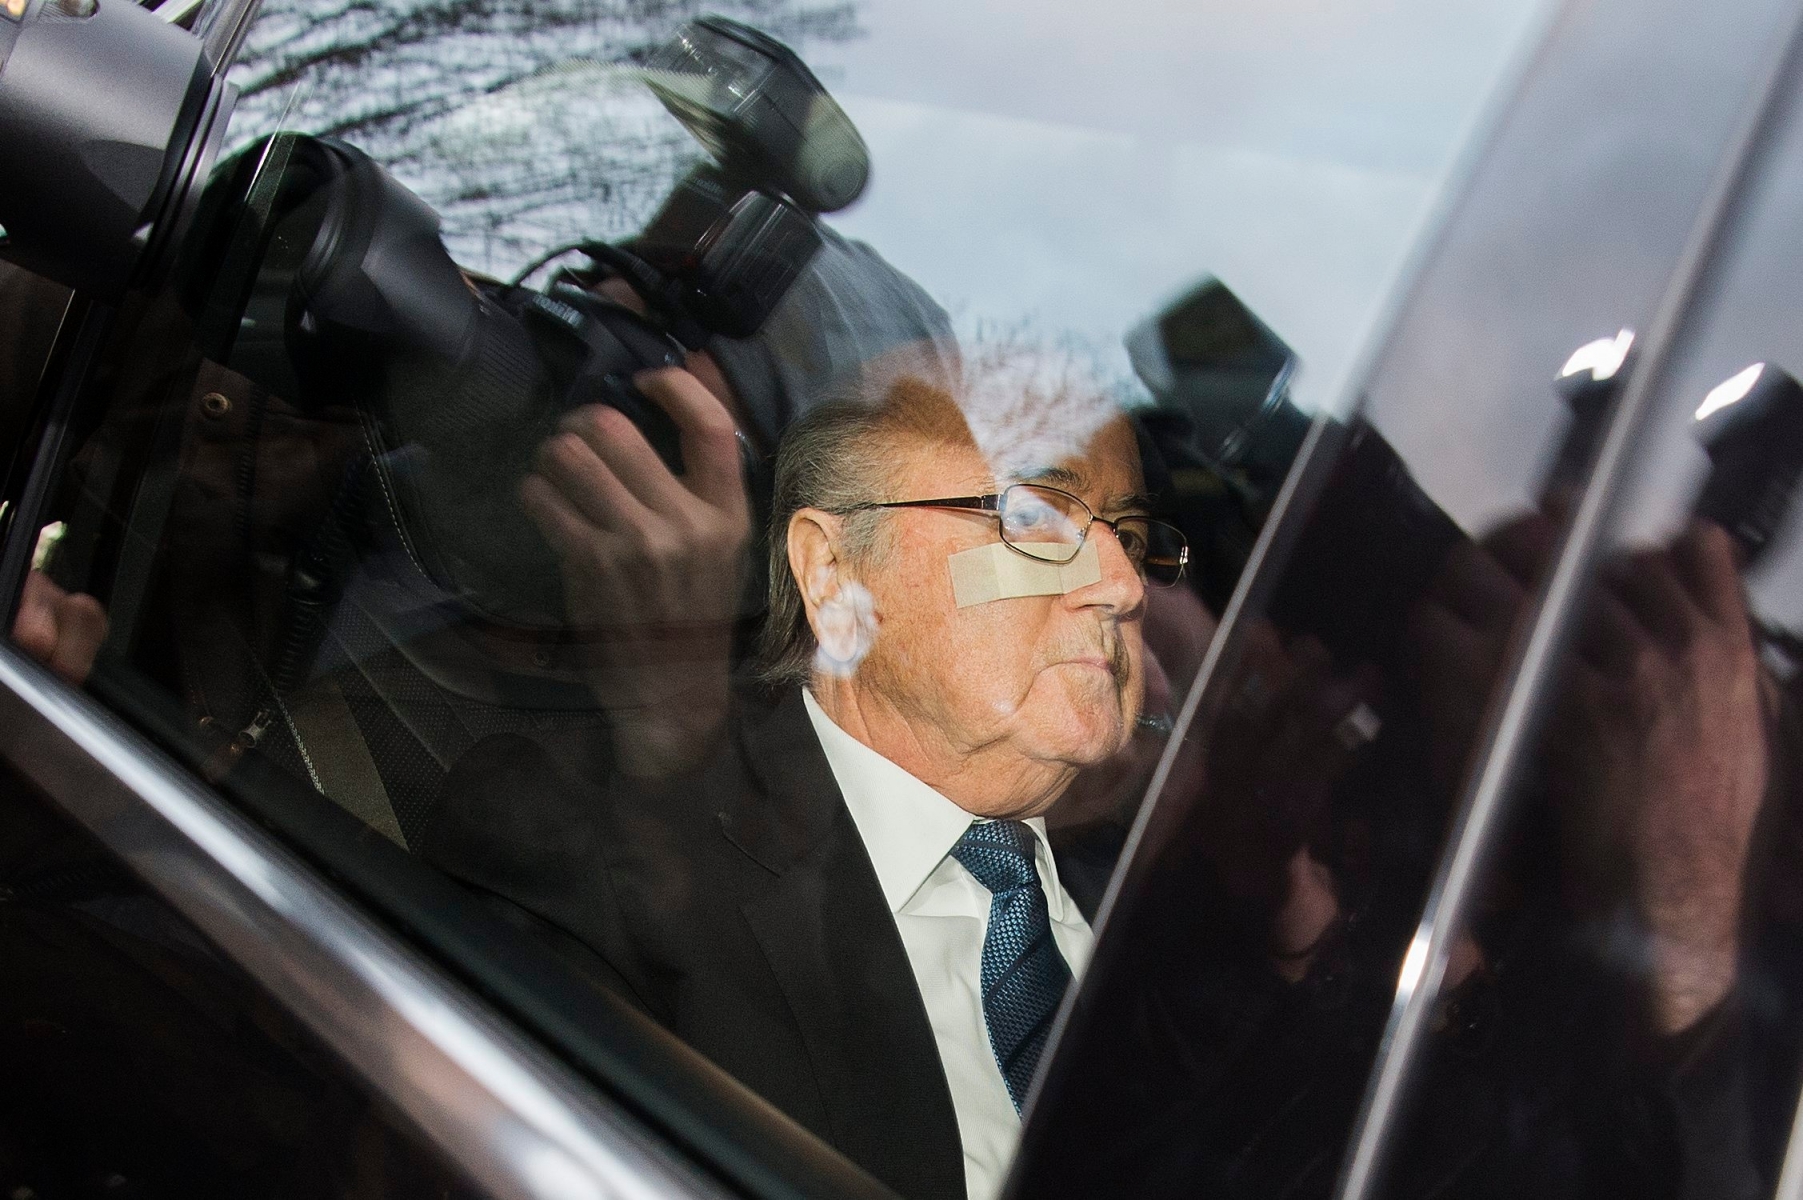 FIFA President Joseph S. Blatter arrives in a car at the FIFA Headquarters "Home of FIFA" in Zurich, Switzerland, Thursday, 17 December 2015. While FIFA President Joseph S. Blatter will appear in person on Thursday before the panel of four judges of the FIFA ethics court, UEFA President Michel Platini plans to boycott his hearing on Friday 18 December. Blatter and Platini were banned for 90 days on 8 October. (KEYSTONE/Walter Bieri) SWITZERLAND SOCCER FIFA JOSEPH S. BLATTER